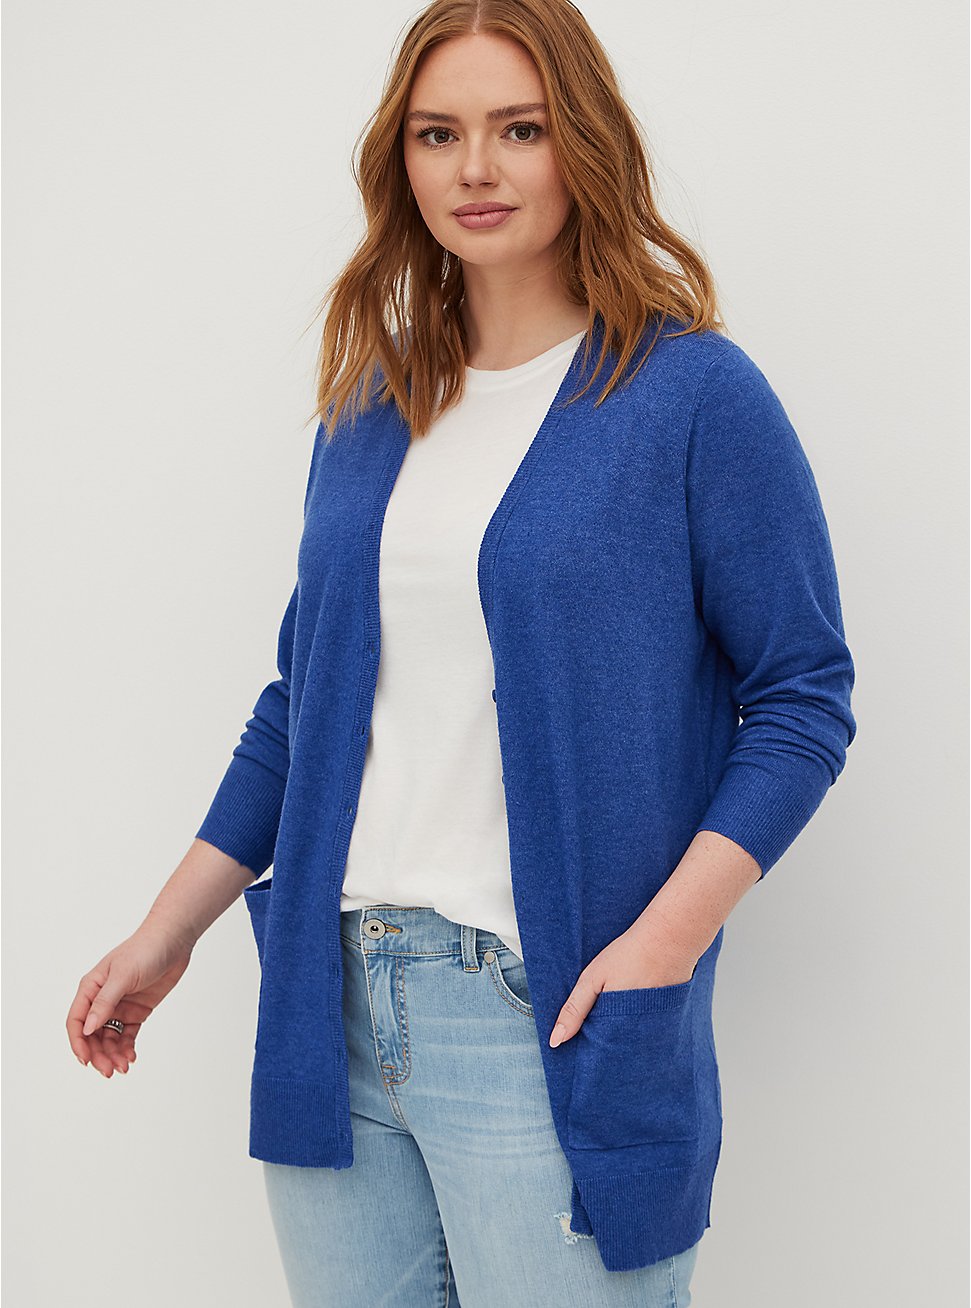 Plus Size Button Front Cardigan Sweater - Ultra Soft Navy, BLUE, hi-res